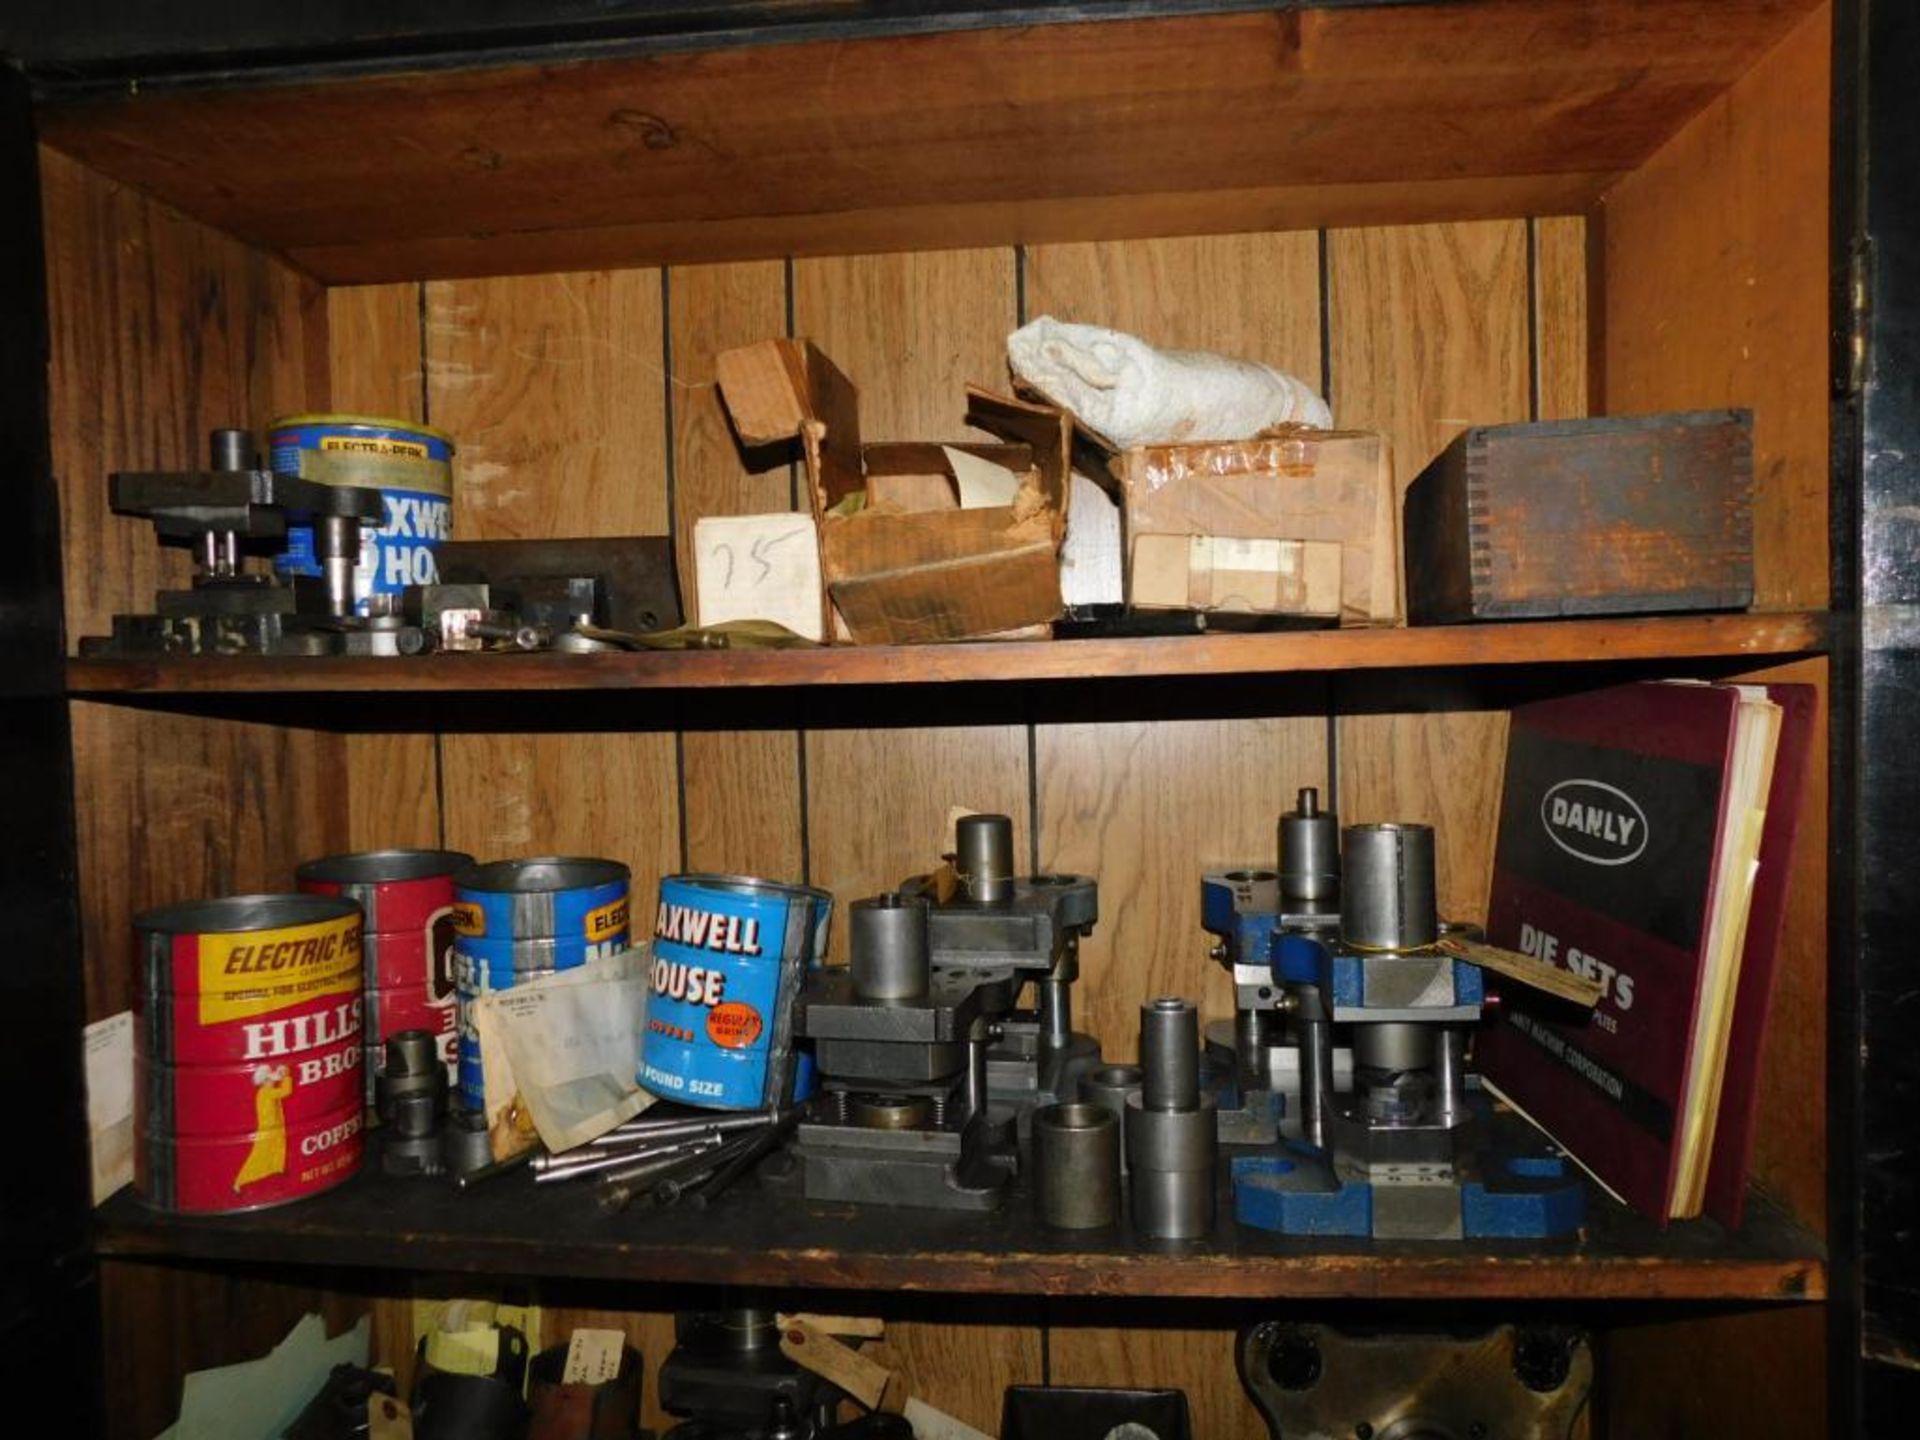 LOT: Shelf & Cabinet w/Approx. (30) Assorted Die Sets, Parts & Accessories - Image 19 of 27